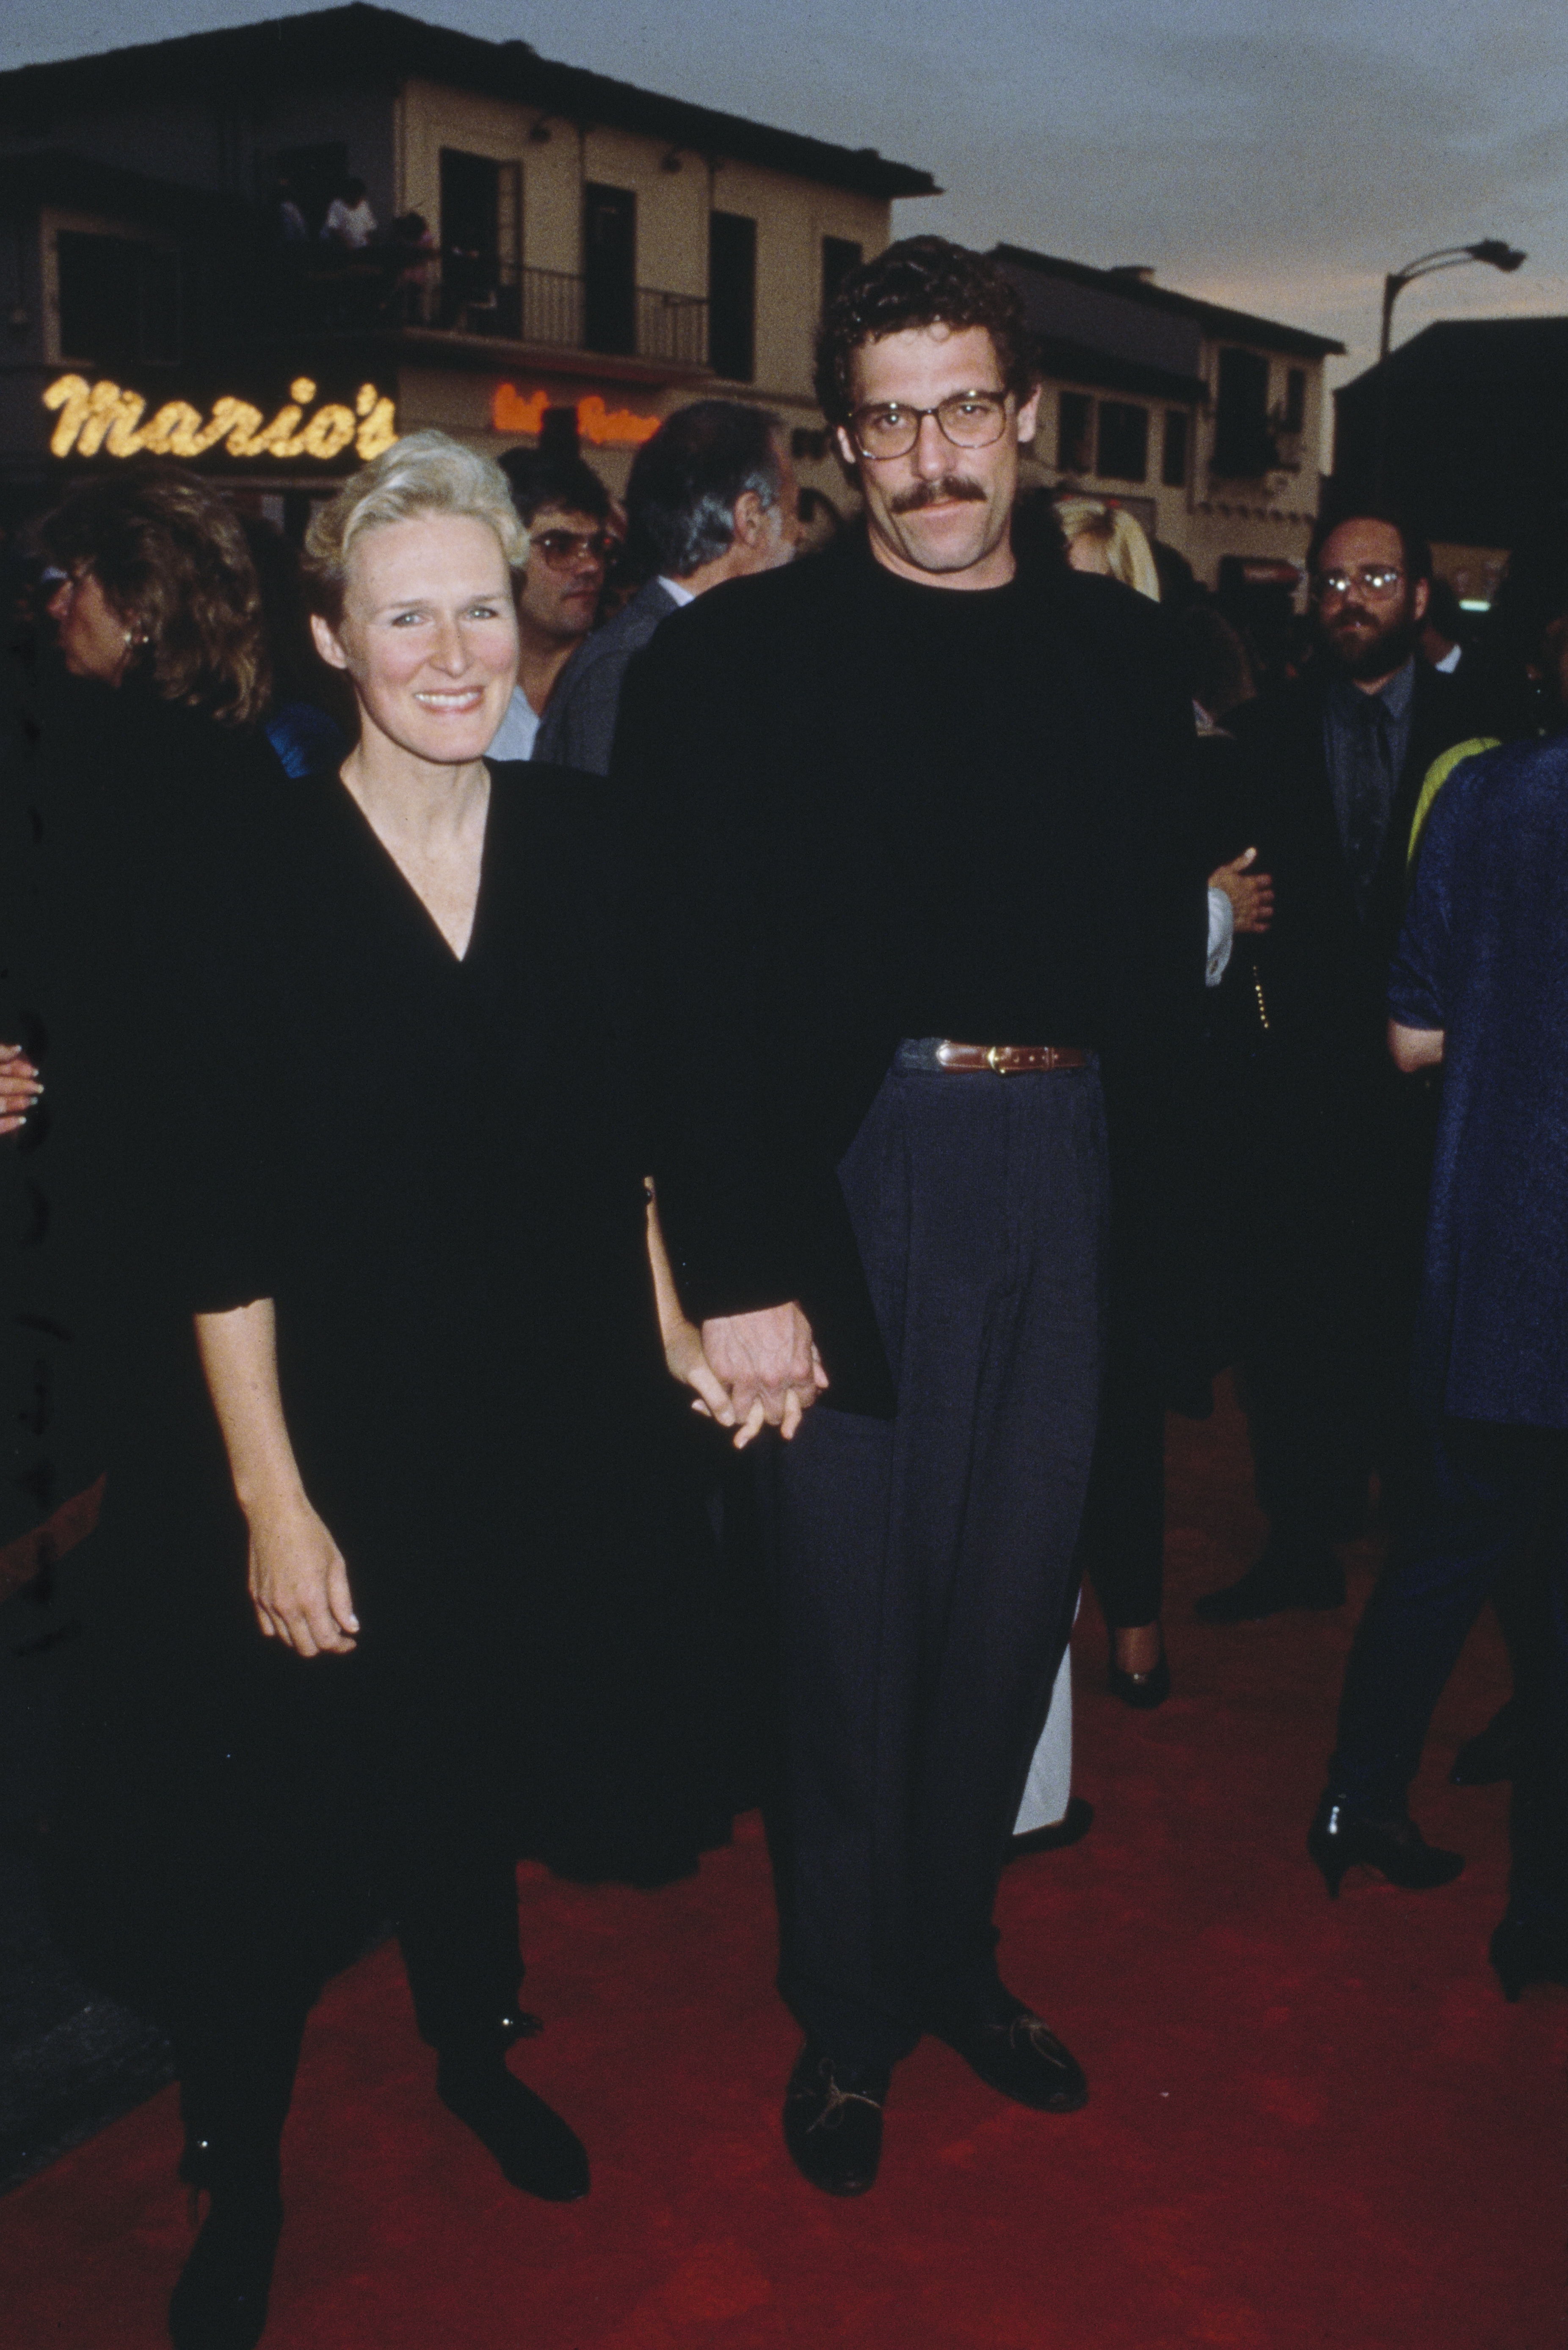 Glenn Close and John Starke at the premiere of the film “Batman” in Westwood, Los Angeles on June 17, 1989 | Source: Getty Images